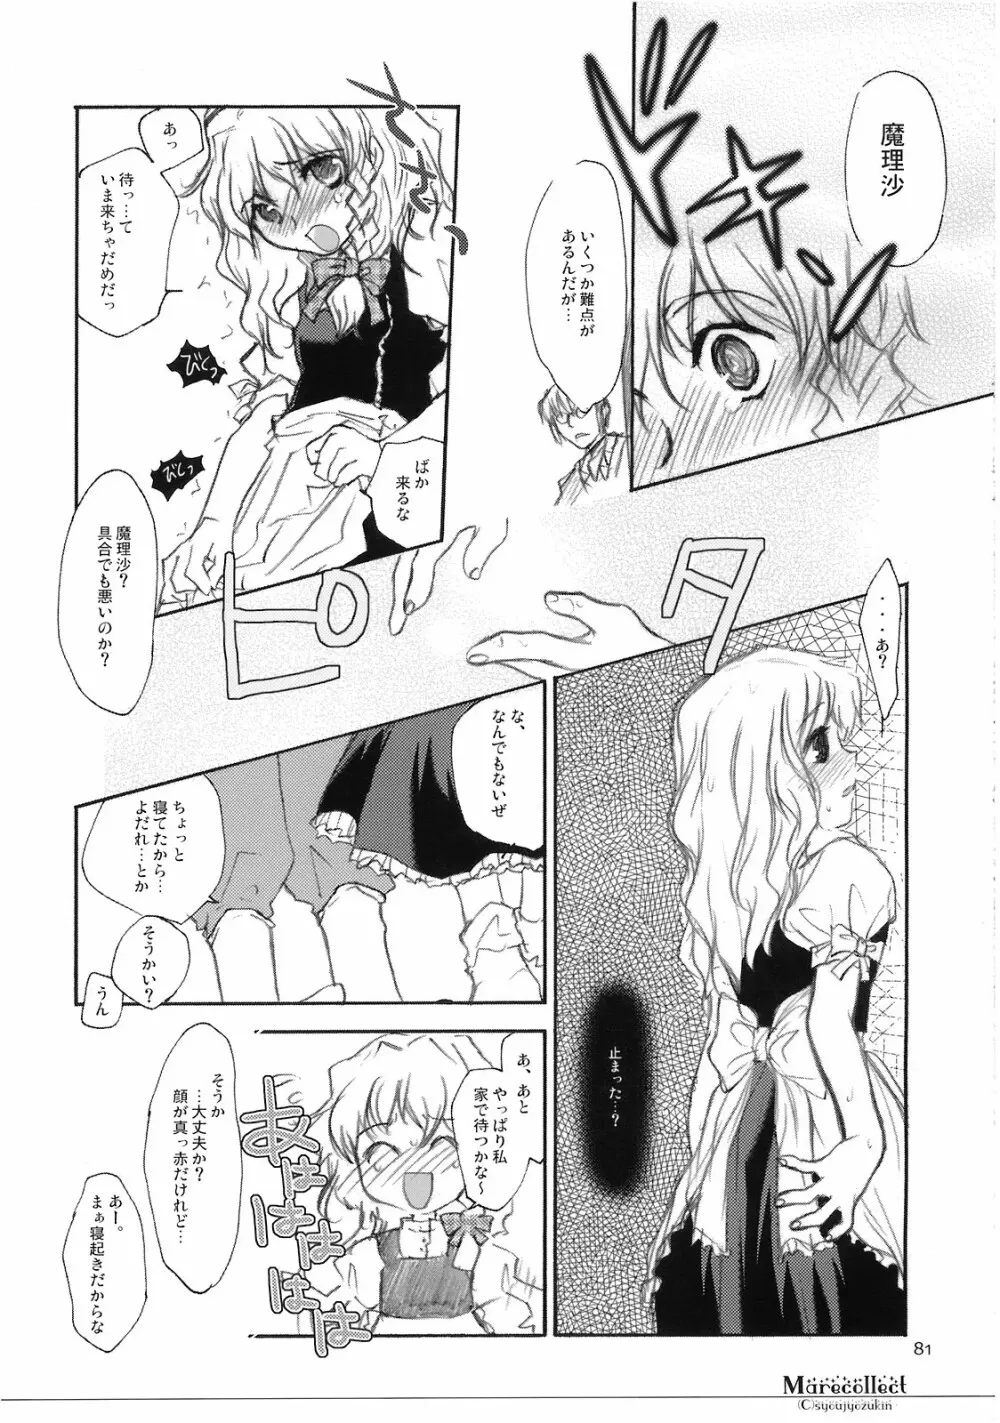 Marecollect Page.81